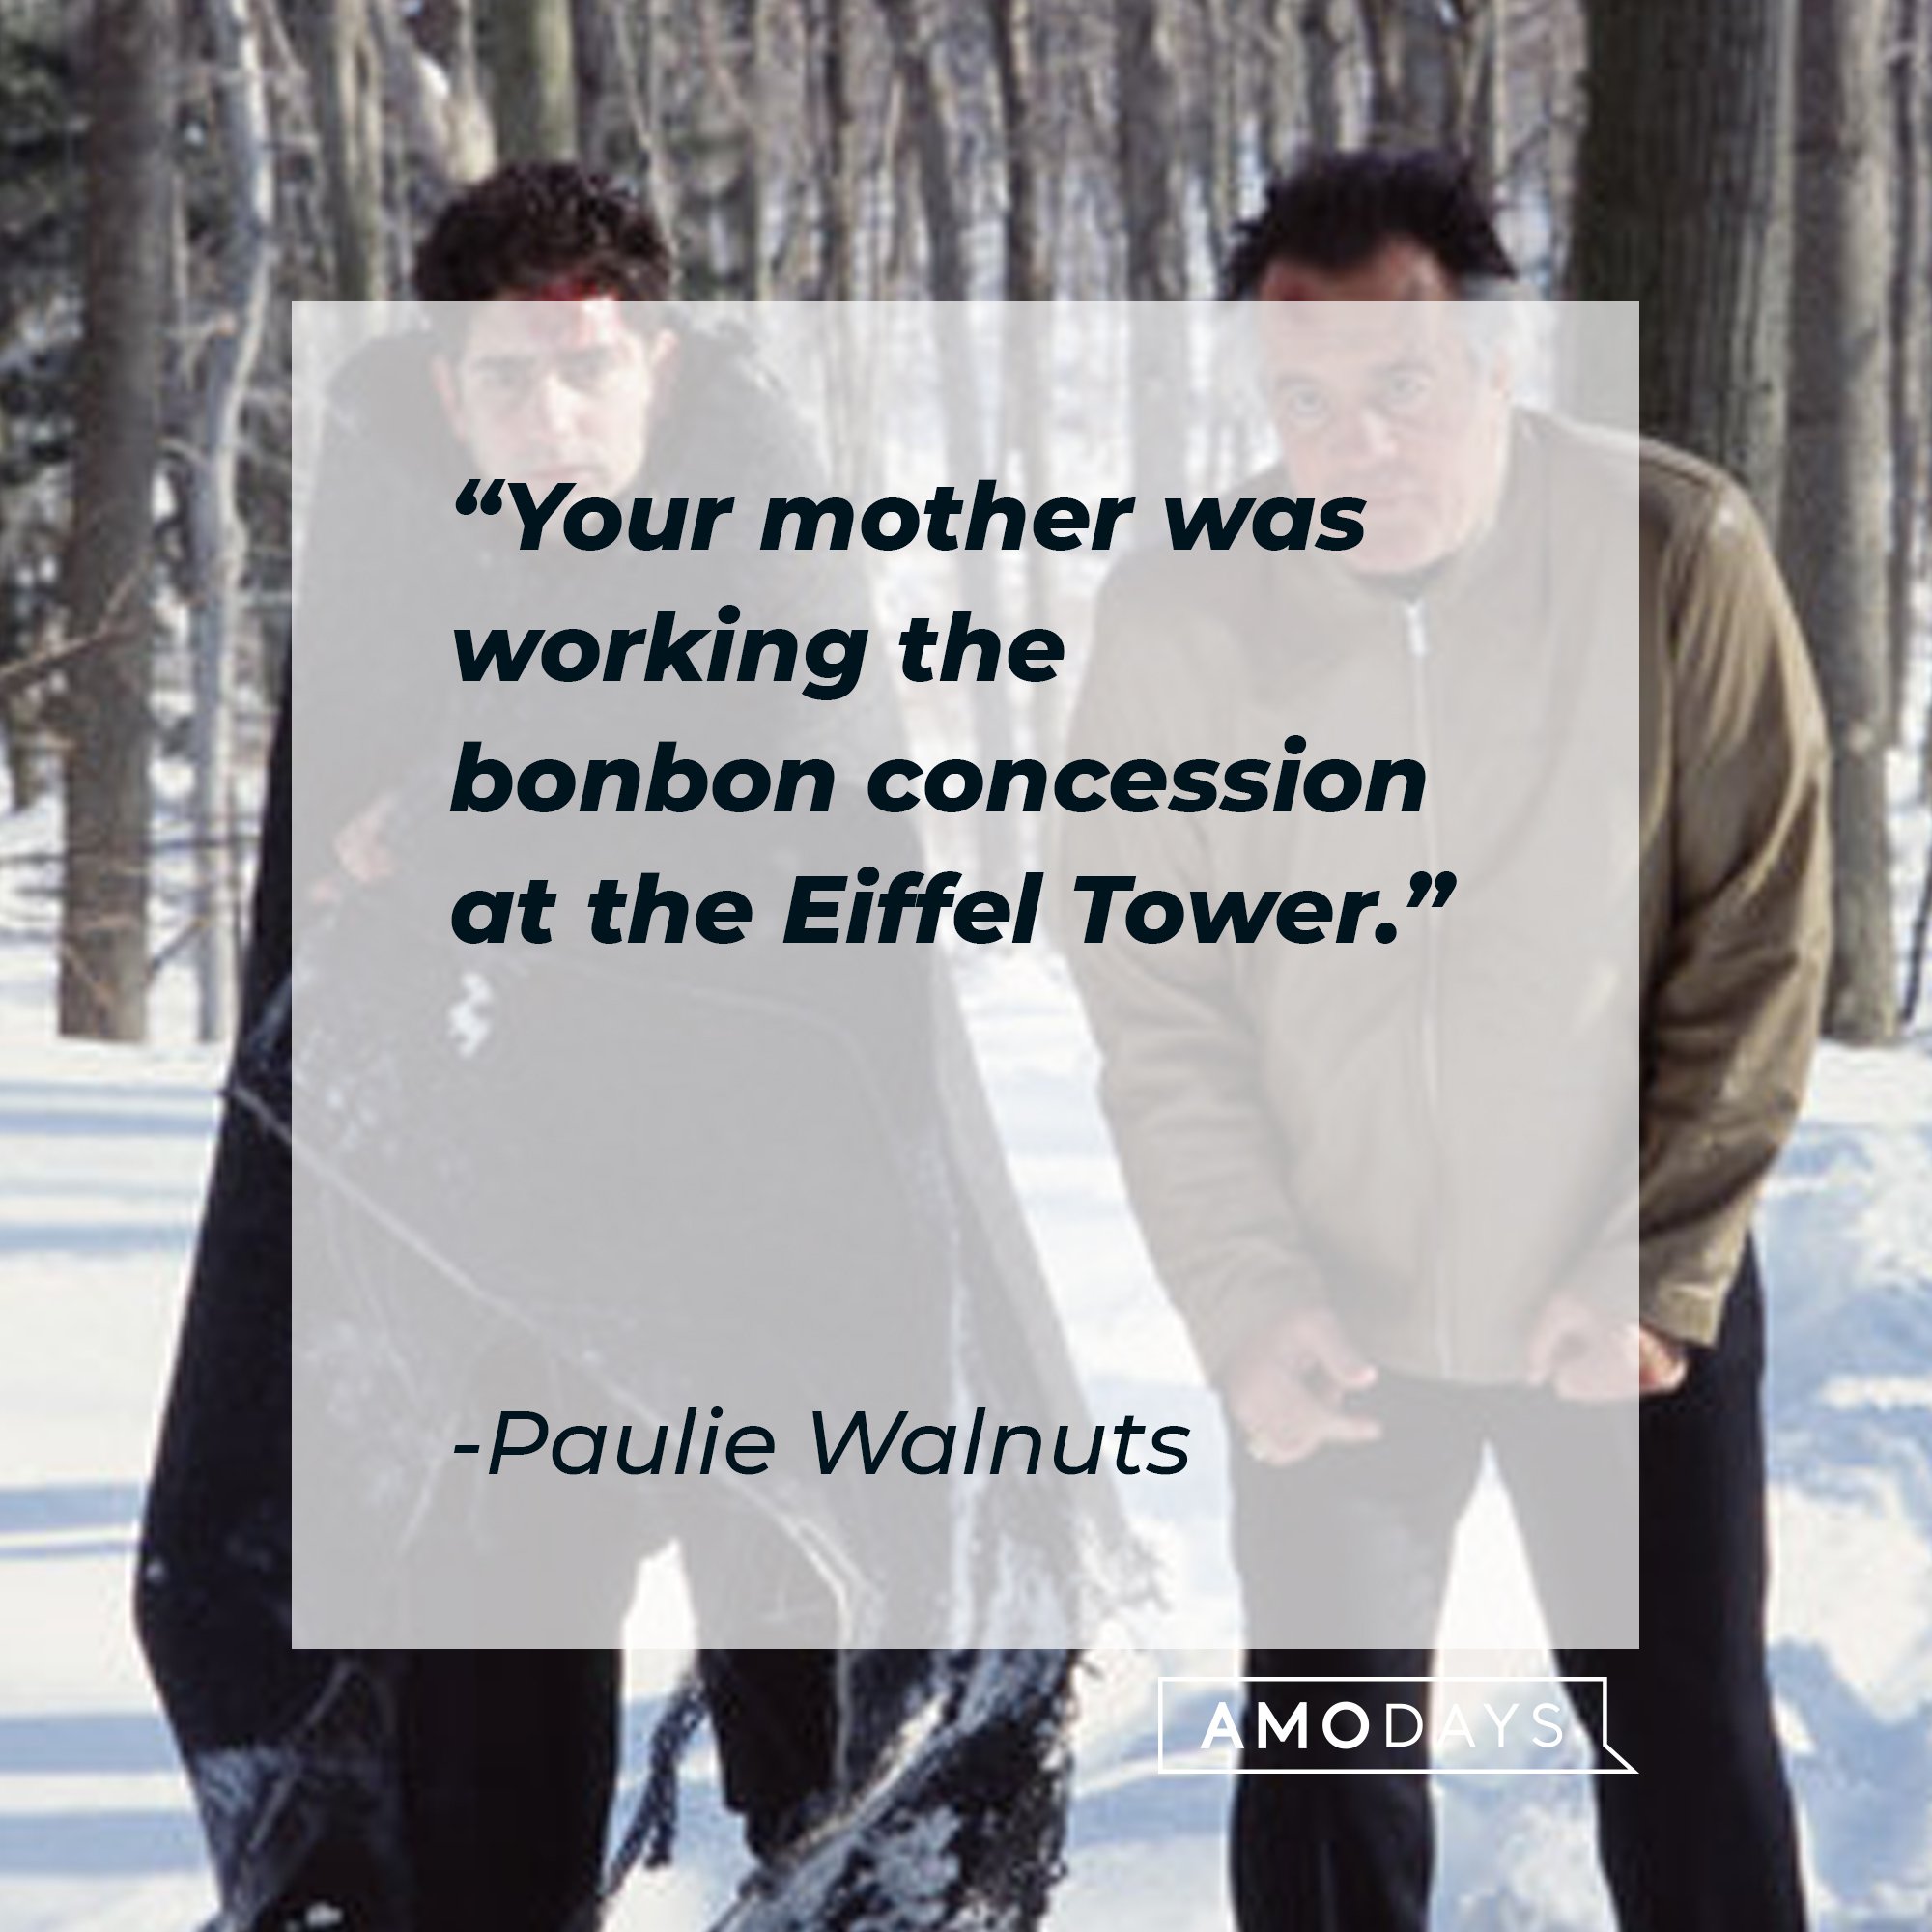 Paulie Walnuts' quote: "Your mother was working the bonbon concession at the Eiffel Tower." | Image: AmoDays 